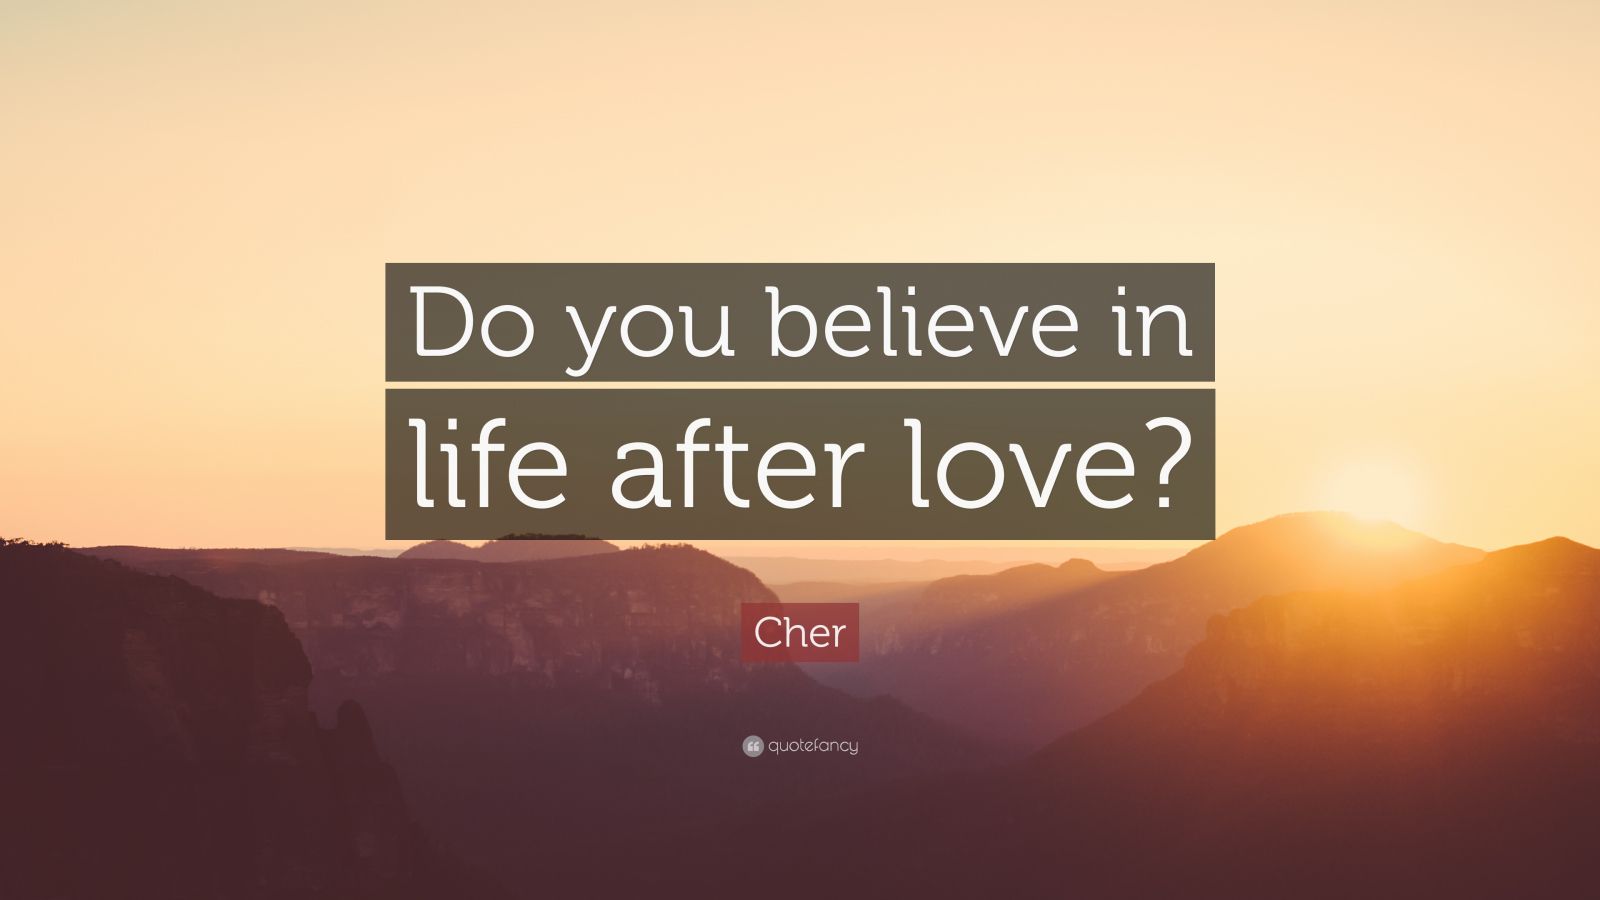 Cher Quote “Do you believe in life after love?” (12 wallpapers